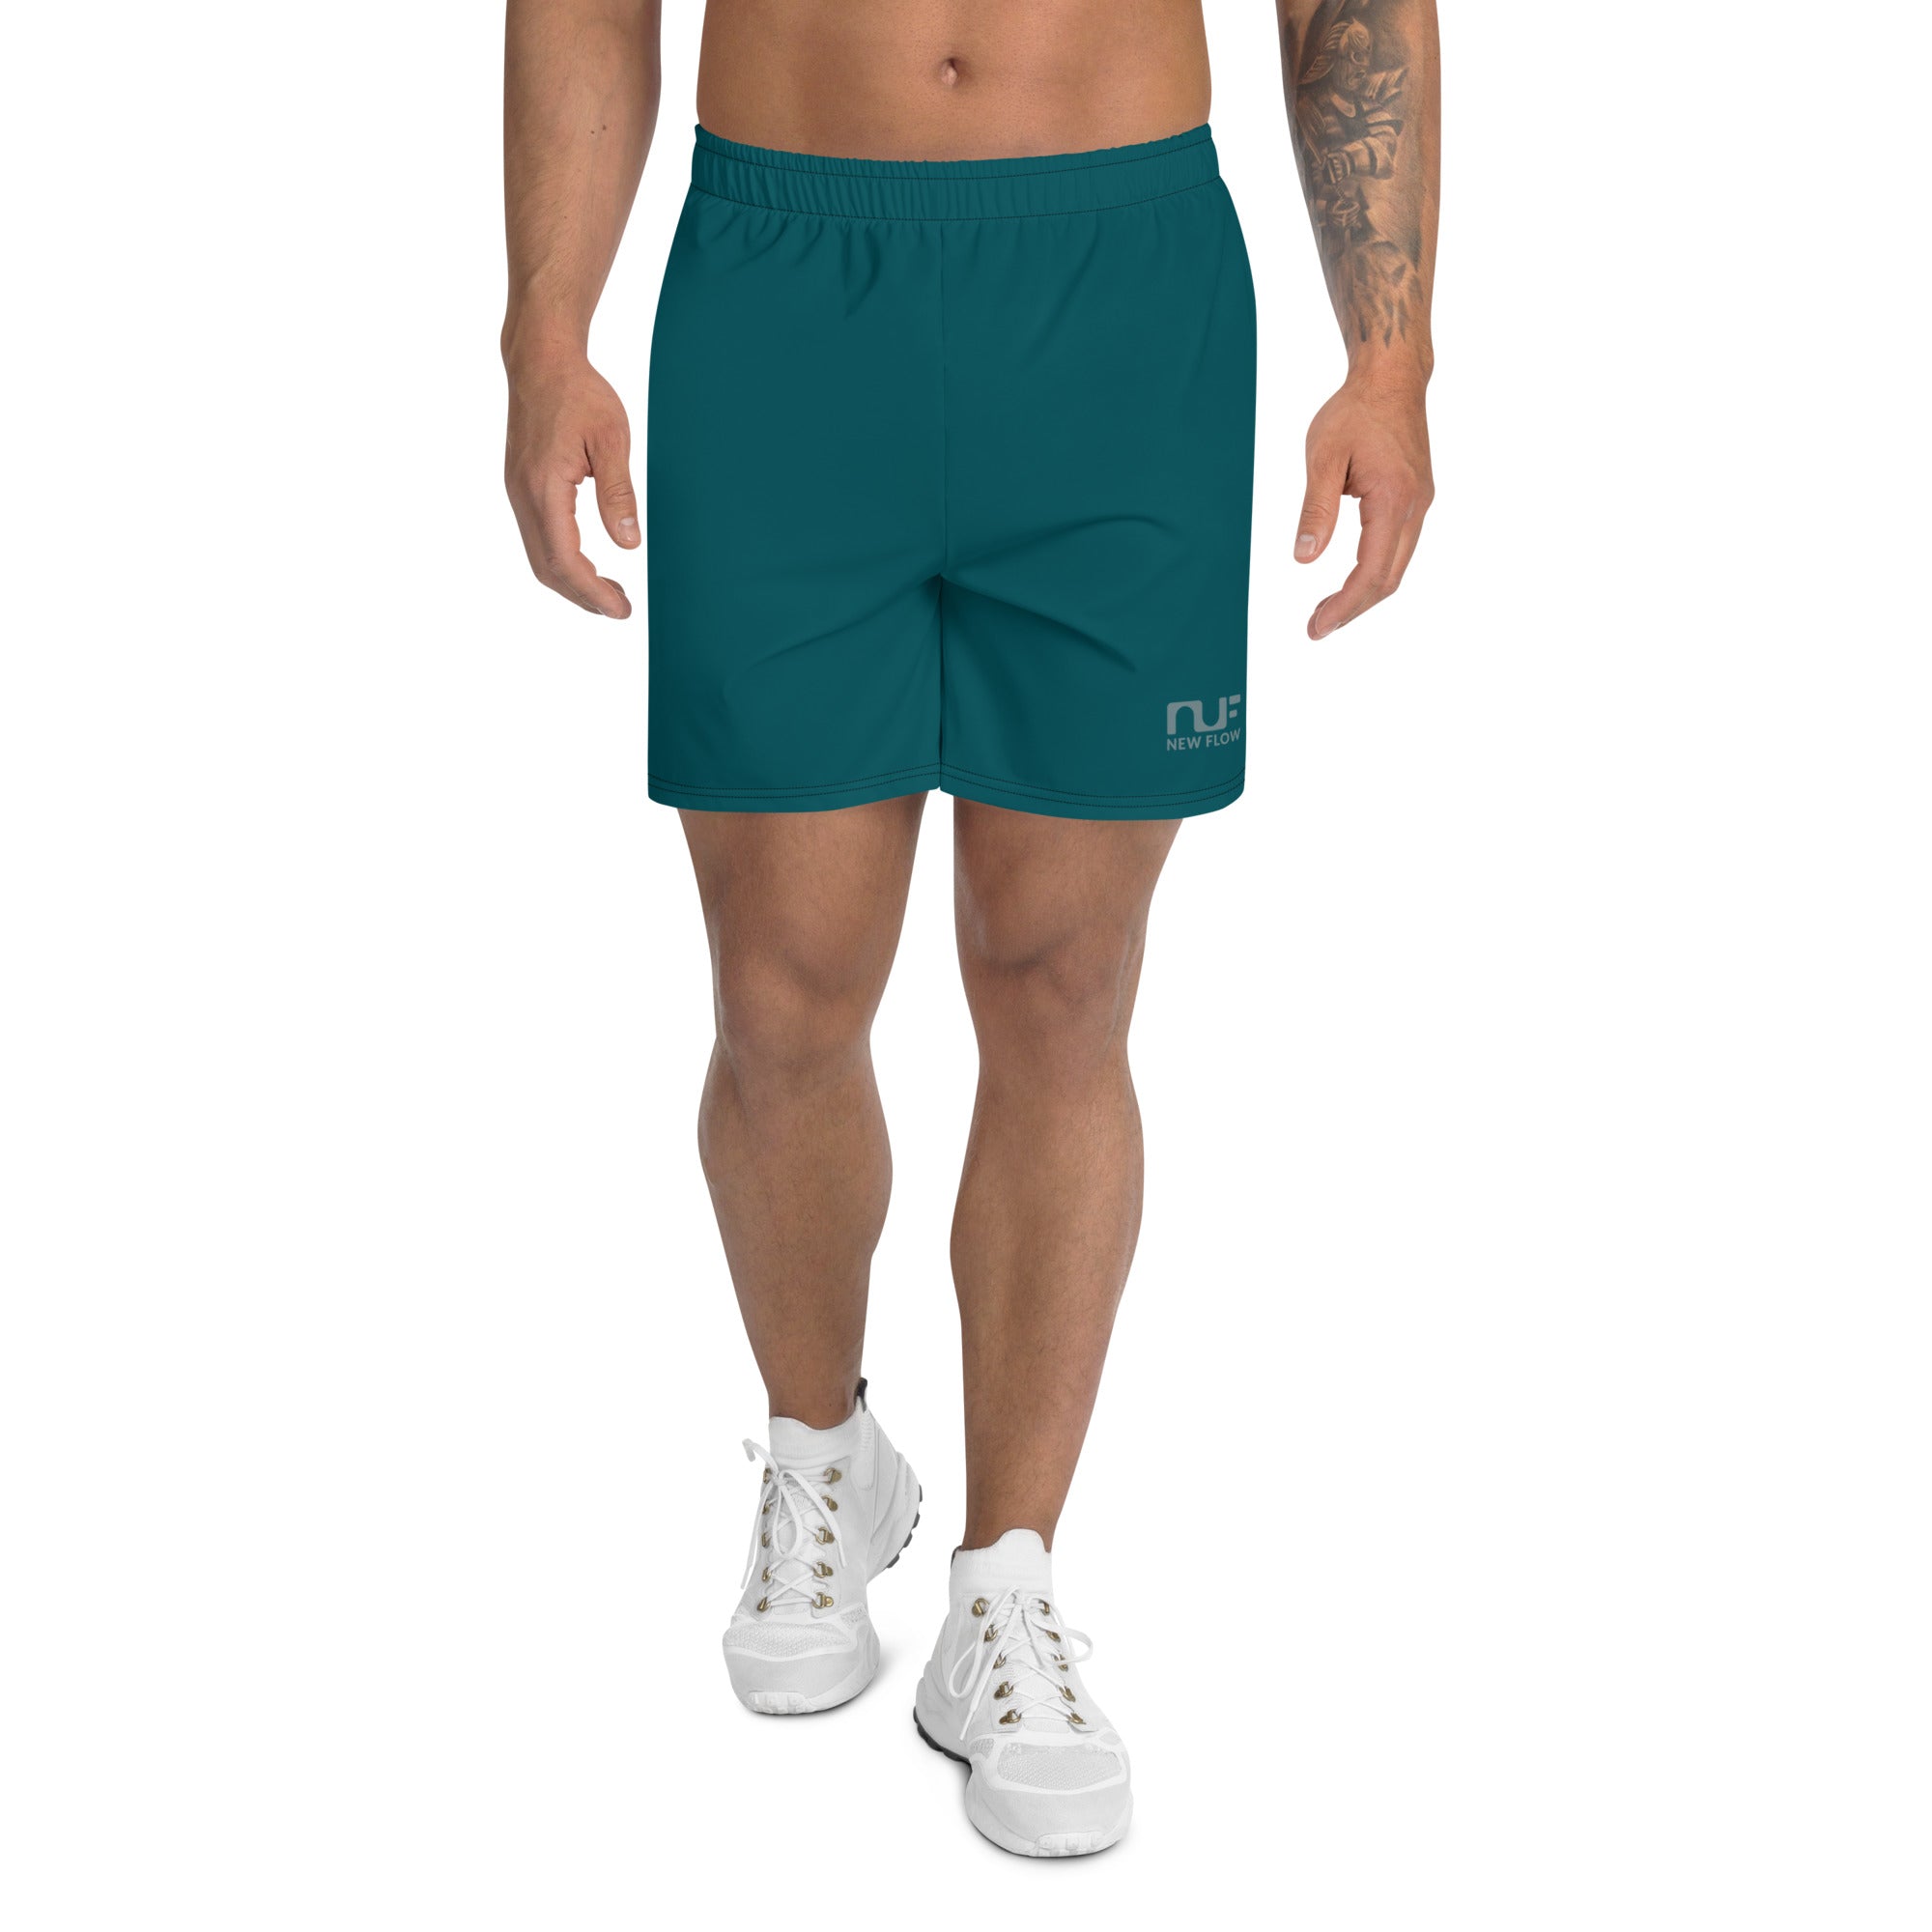 MEN'S RECYCLED ATHLETIC SHORTS – DEEP TEAL